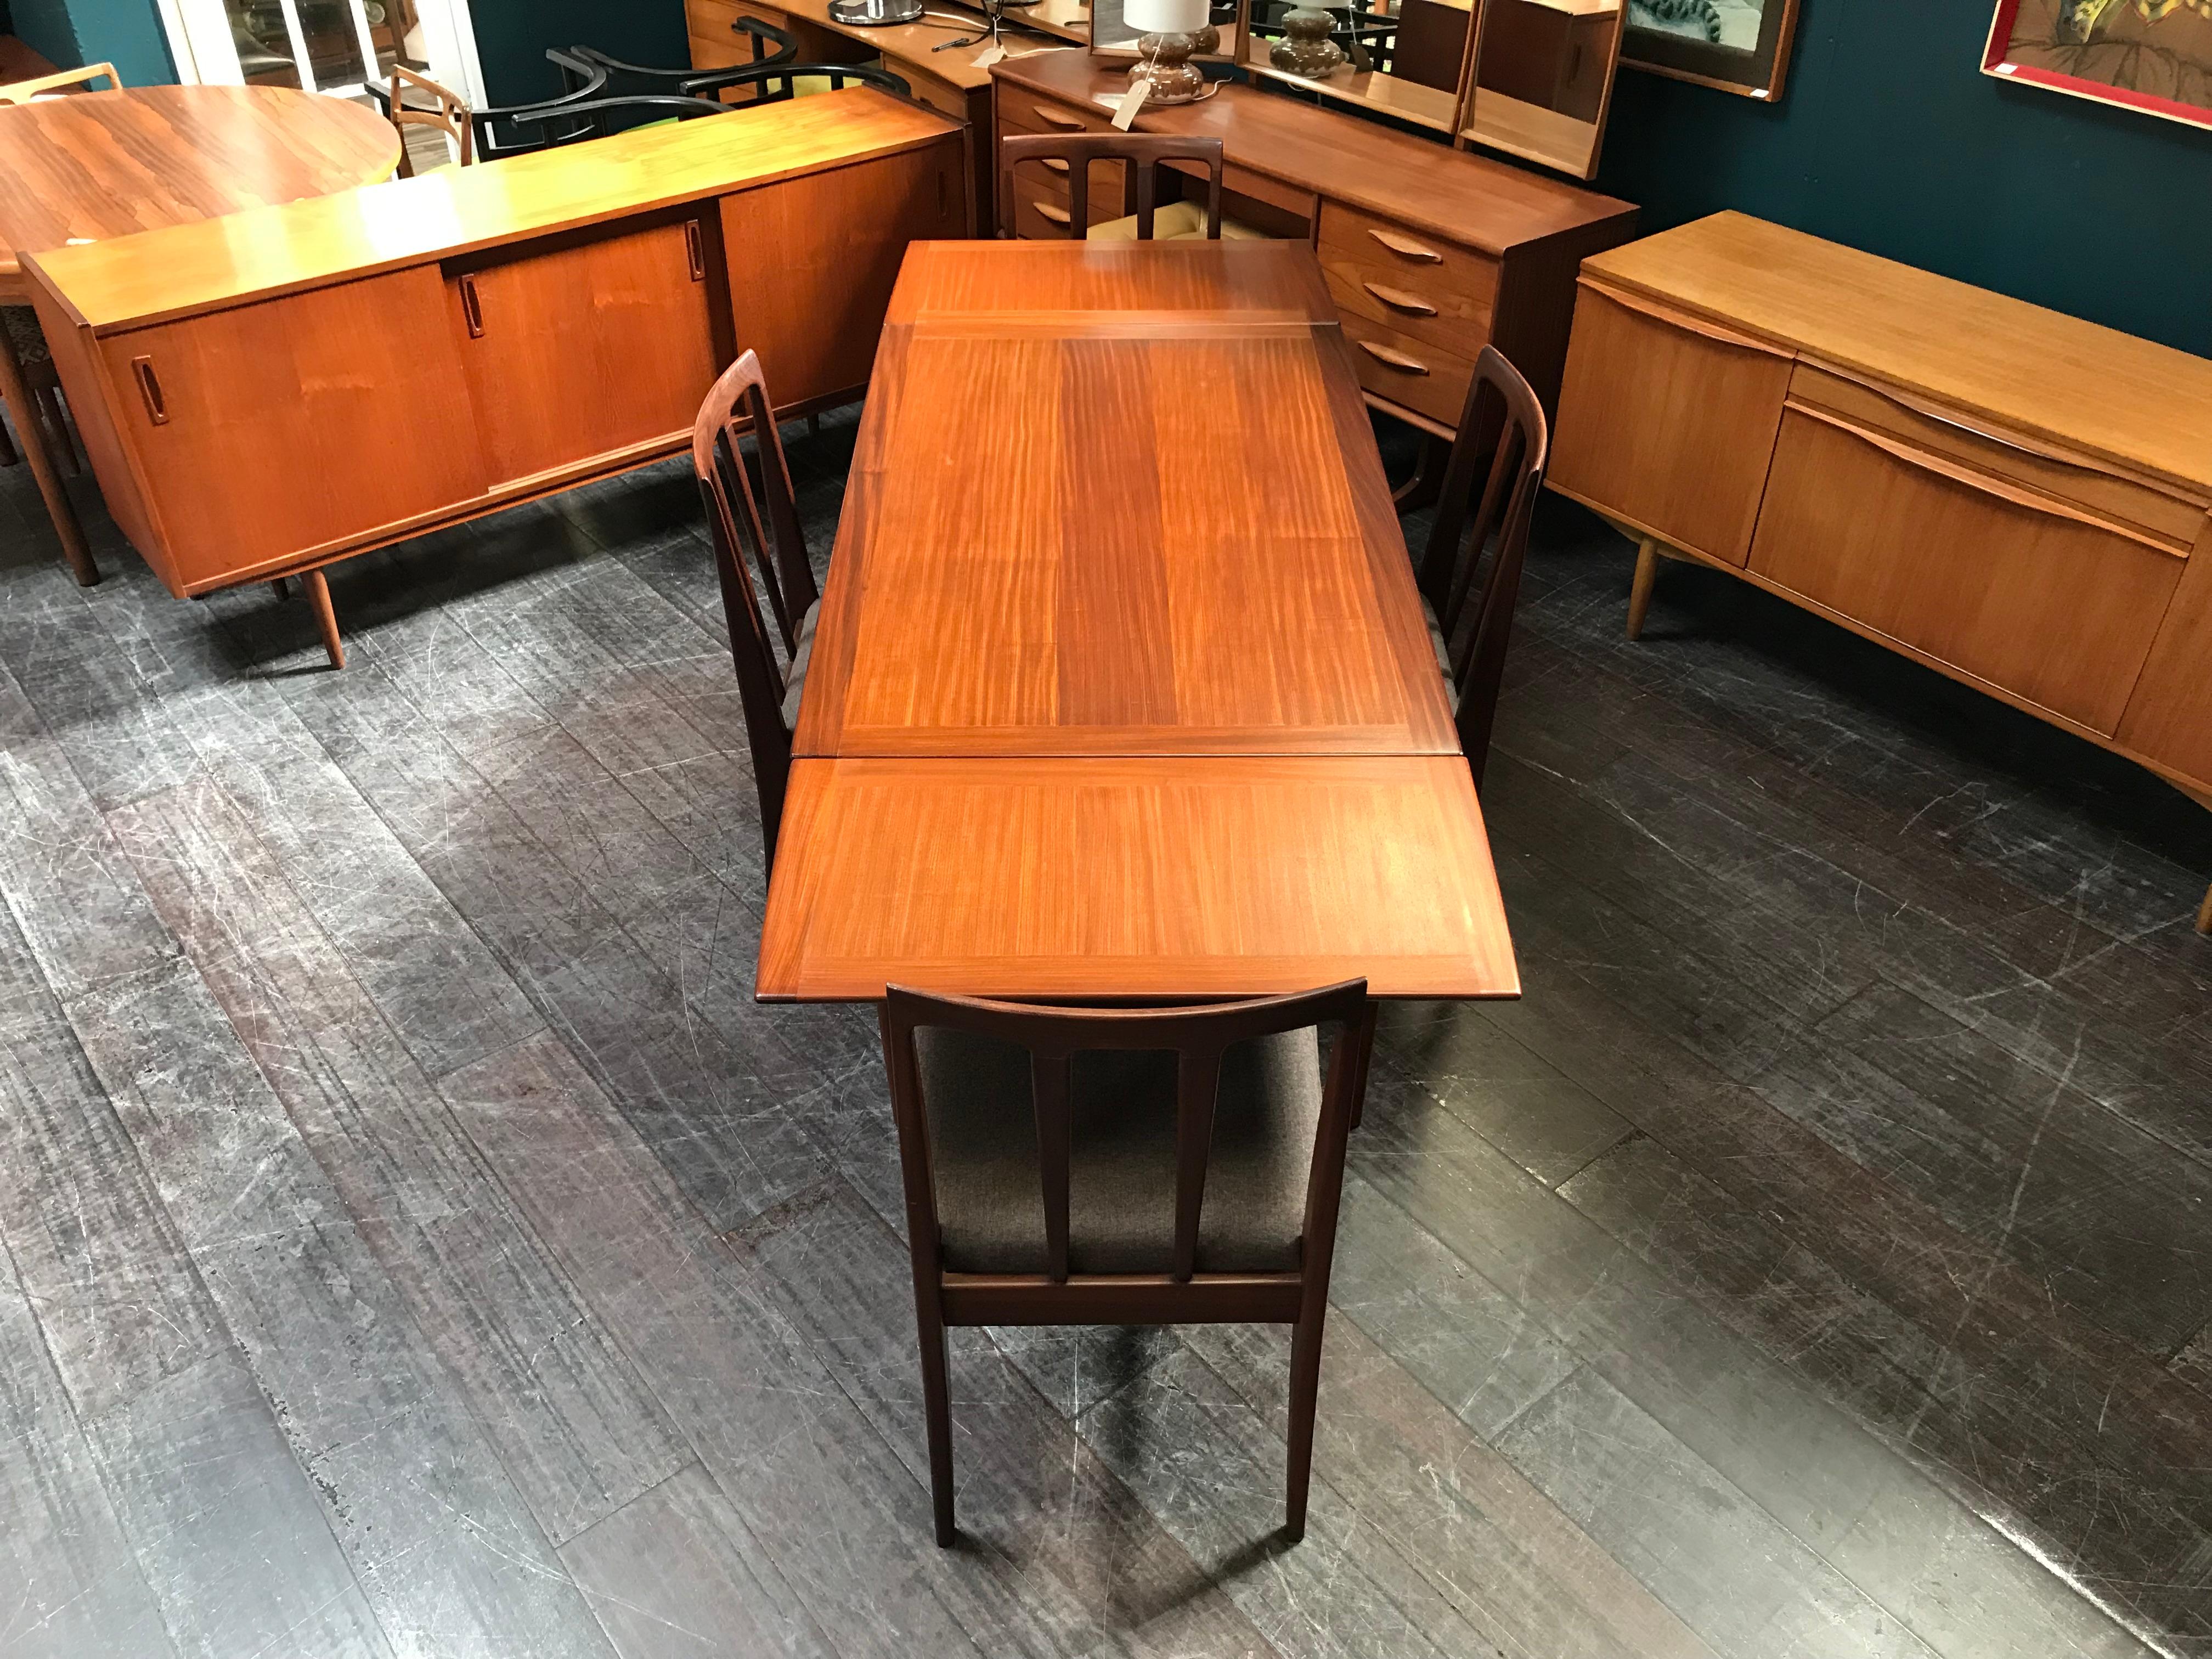 Extending Midcentury Afrormosia Dining Table with 4 Chairs by Younger of Glasgow For Sale 6